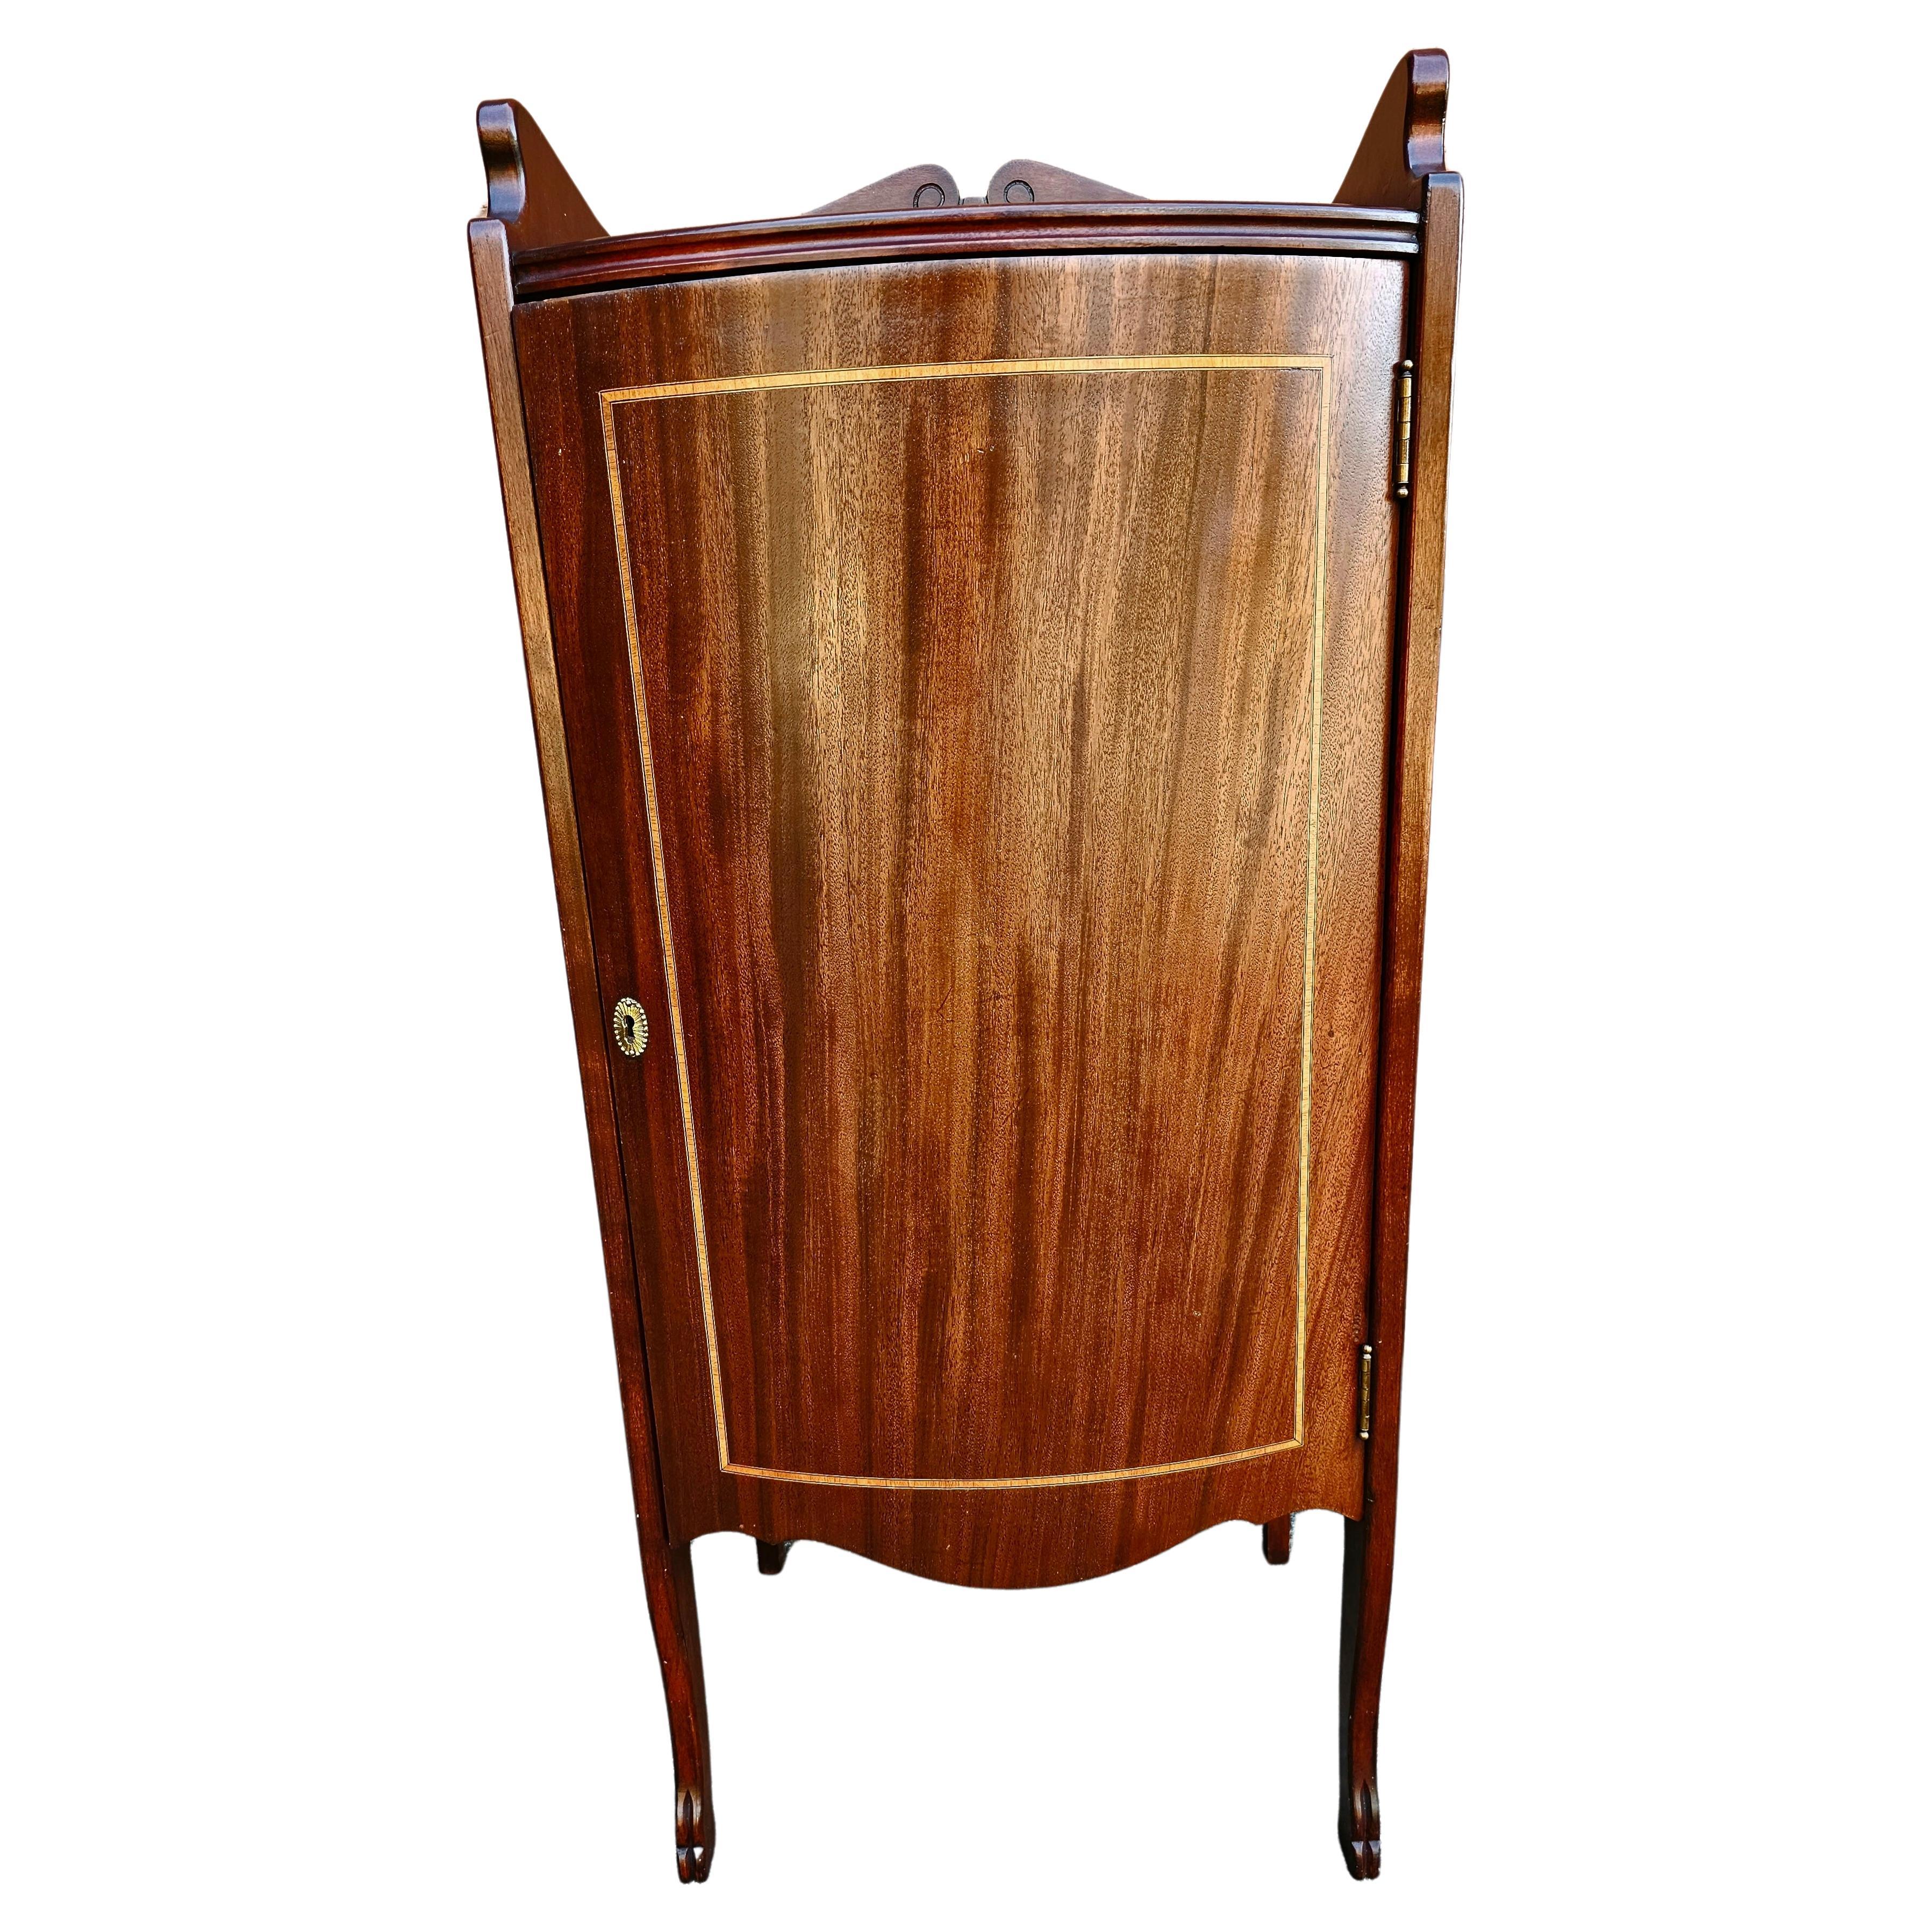 1930s Refinished Edwardian Mahogany and Satinwood Inlaid Sheet Music Cabinet For Sale